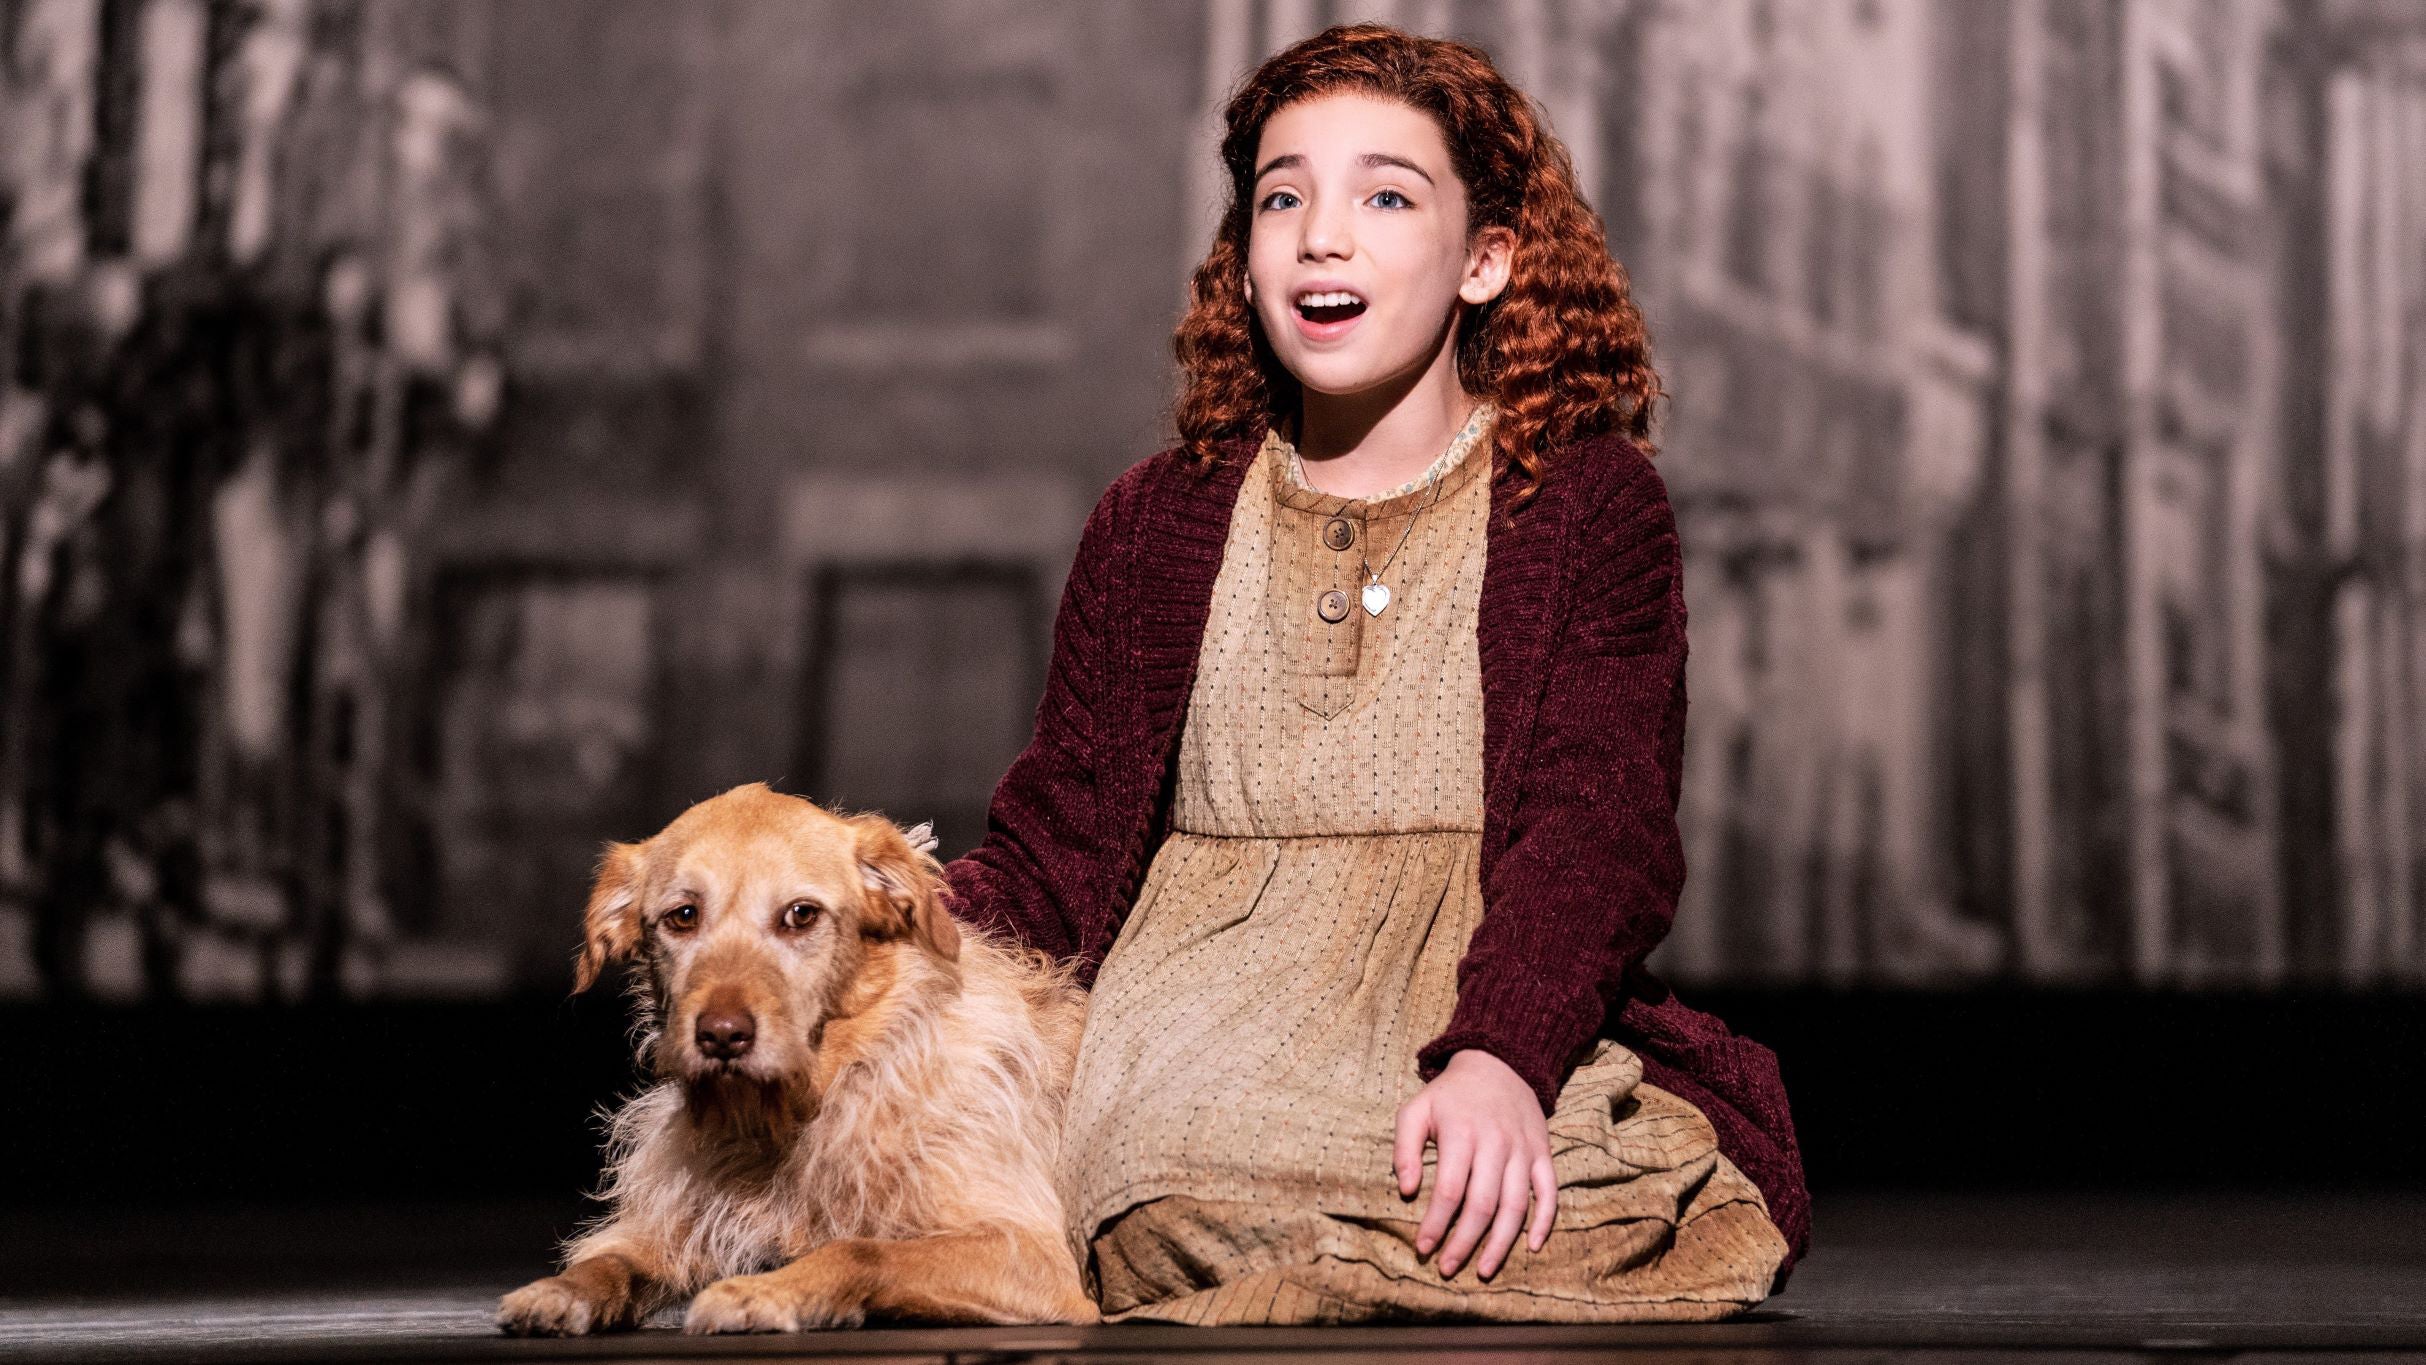 Annie (Touring) in Detroit promo photo for Me + 3 4-Pack  presale offer code